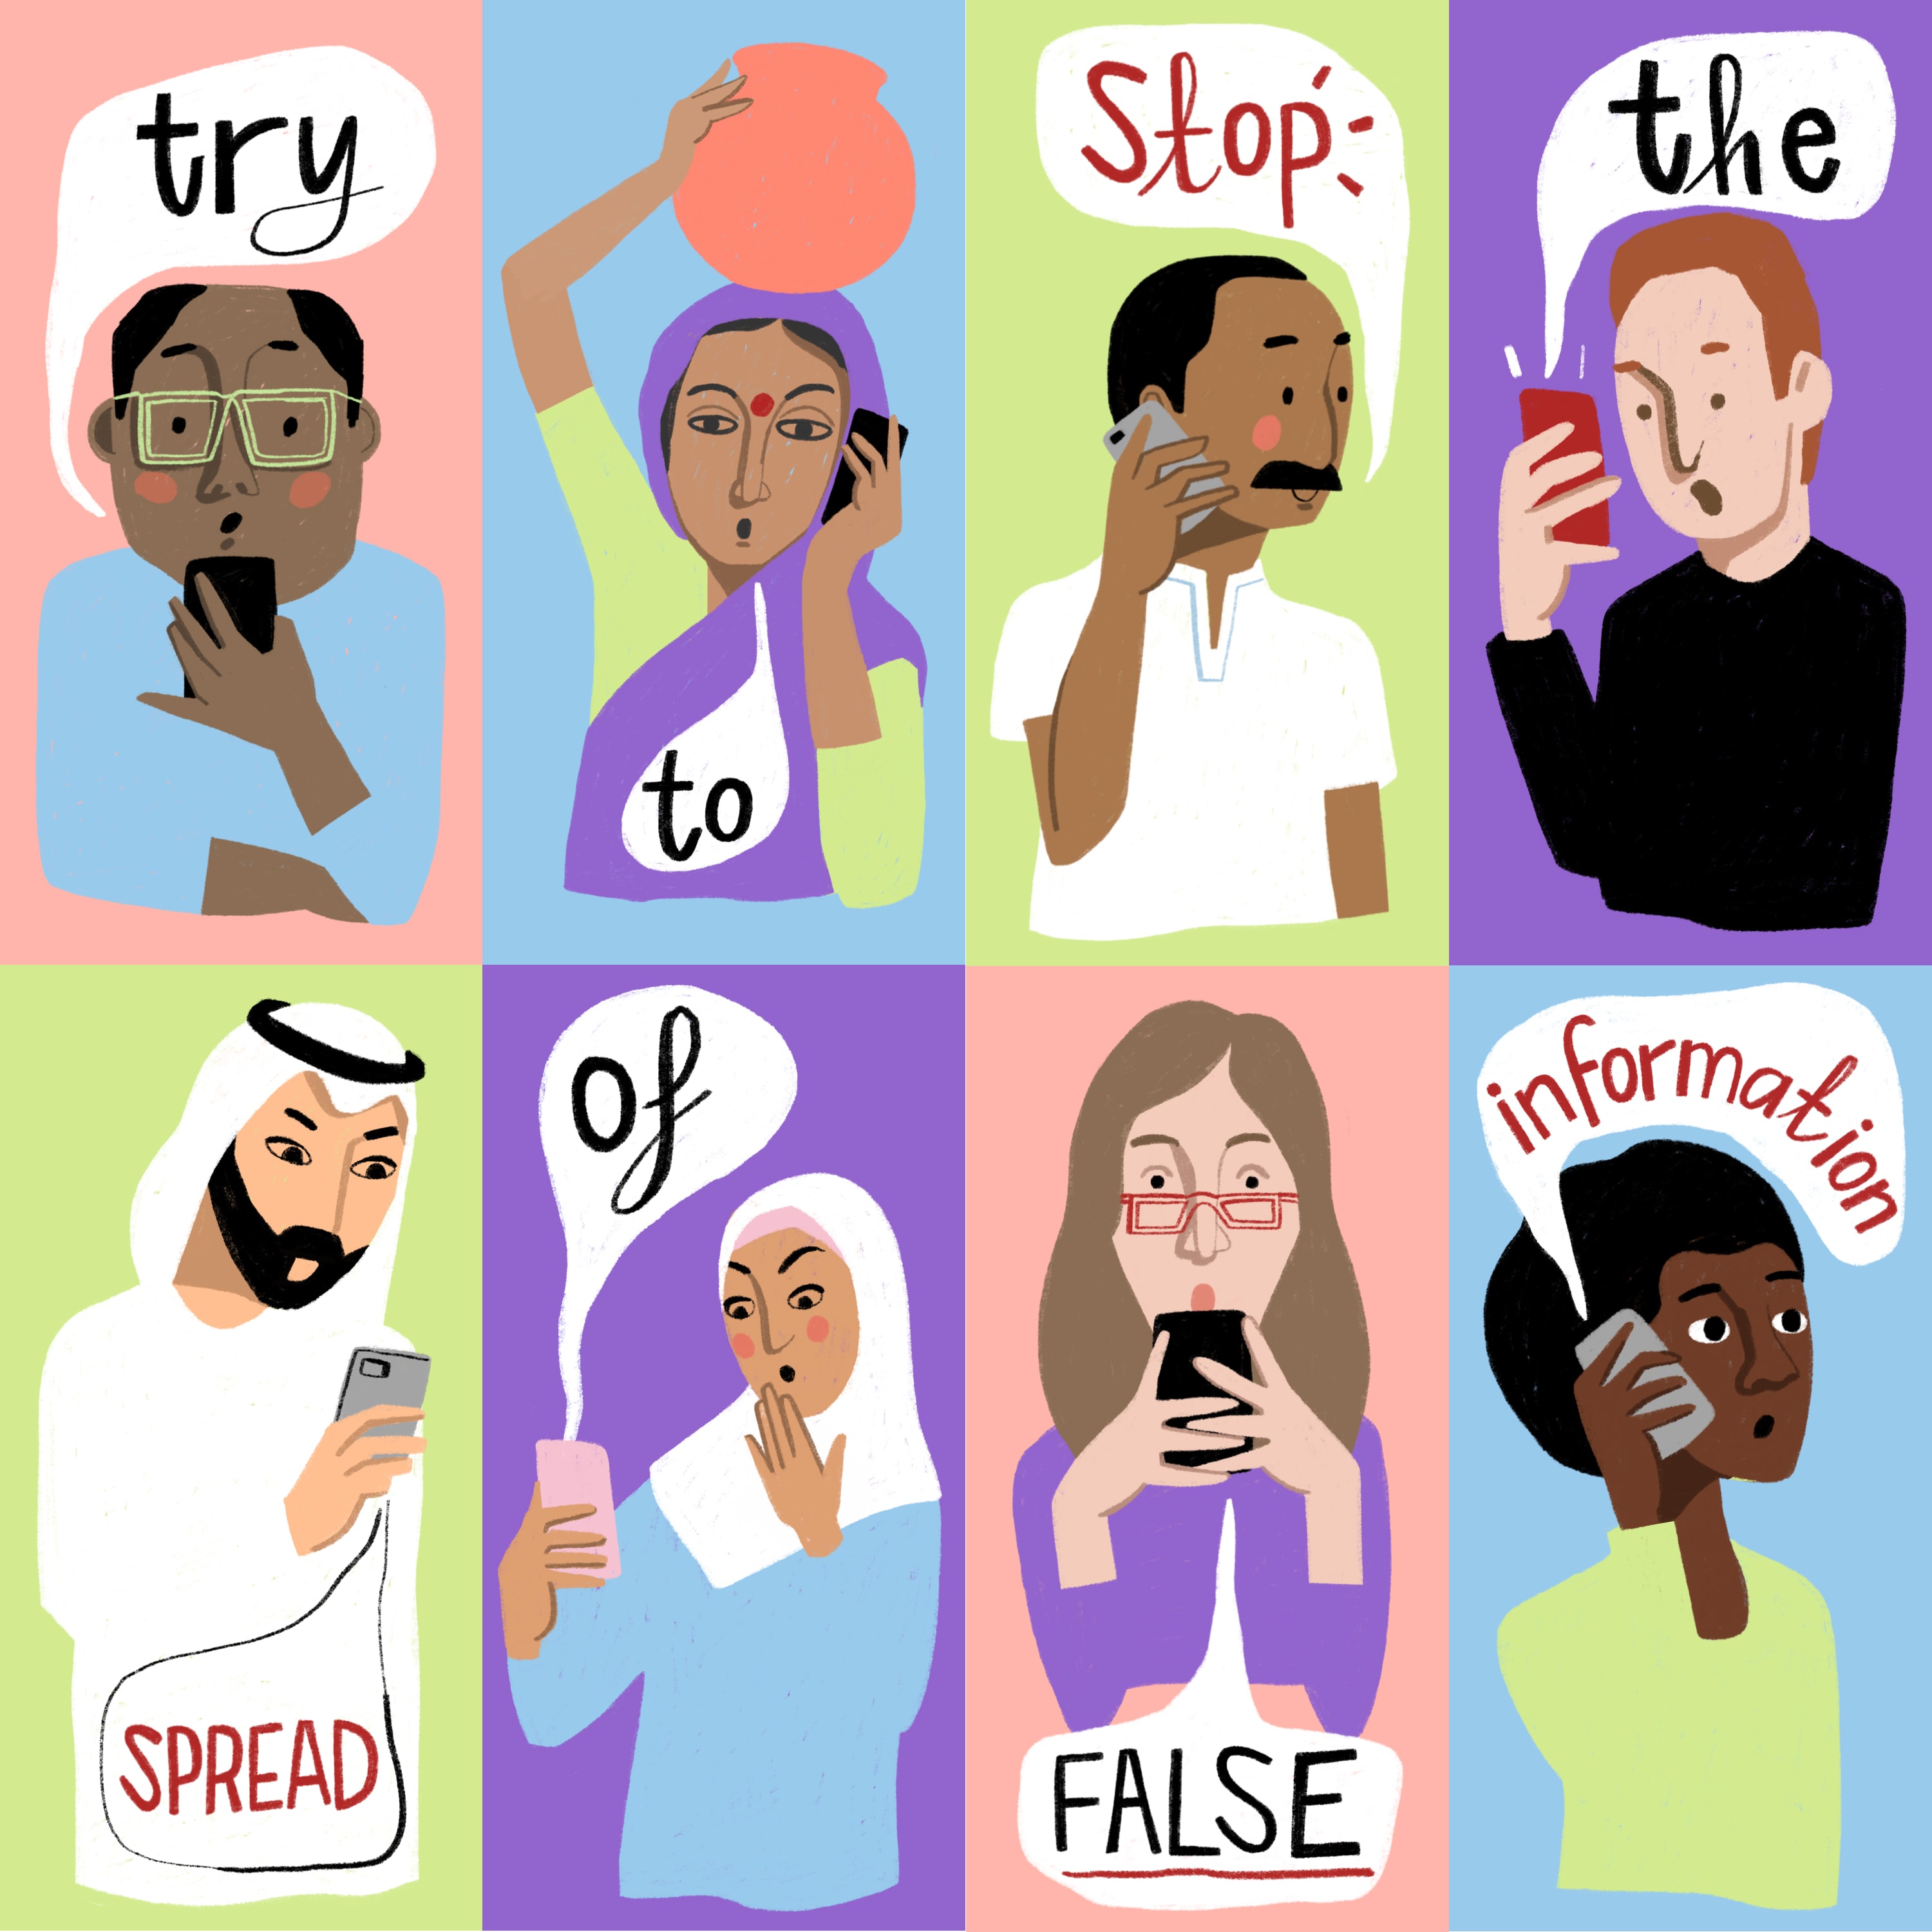 illustration: try to stop the spread of false information